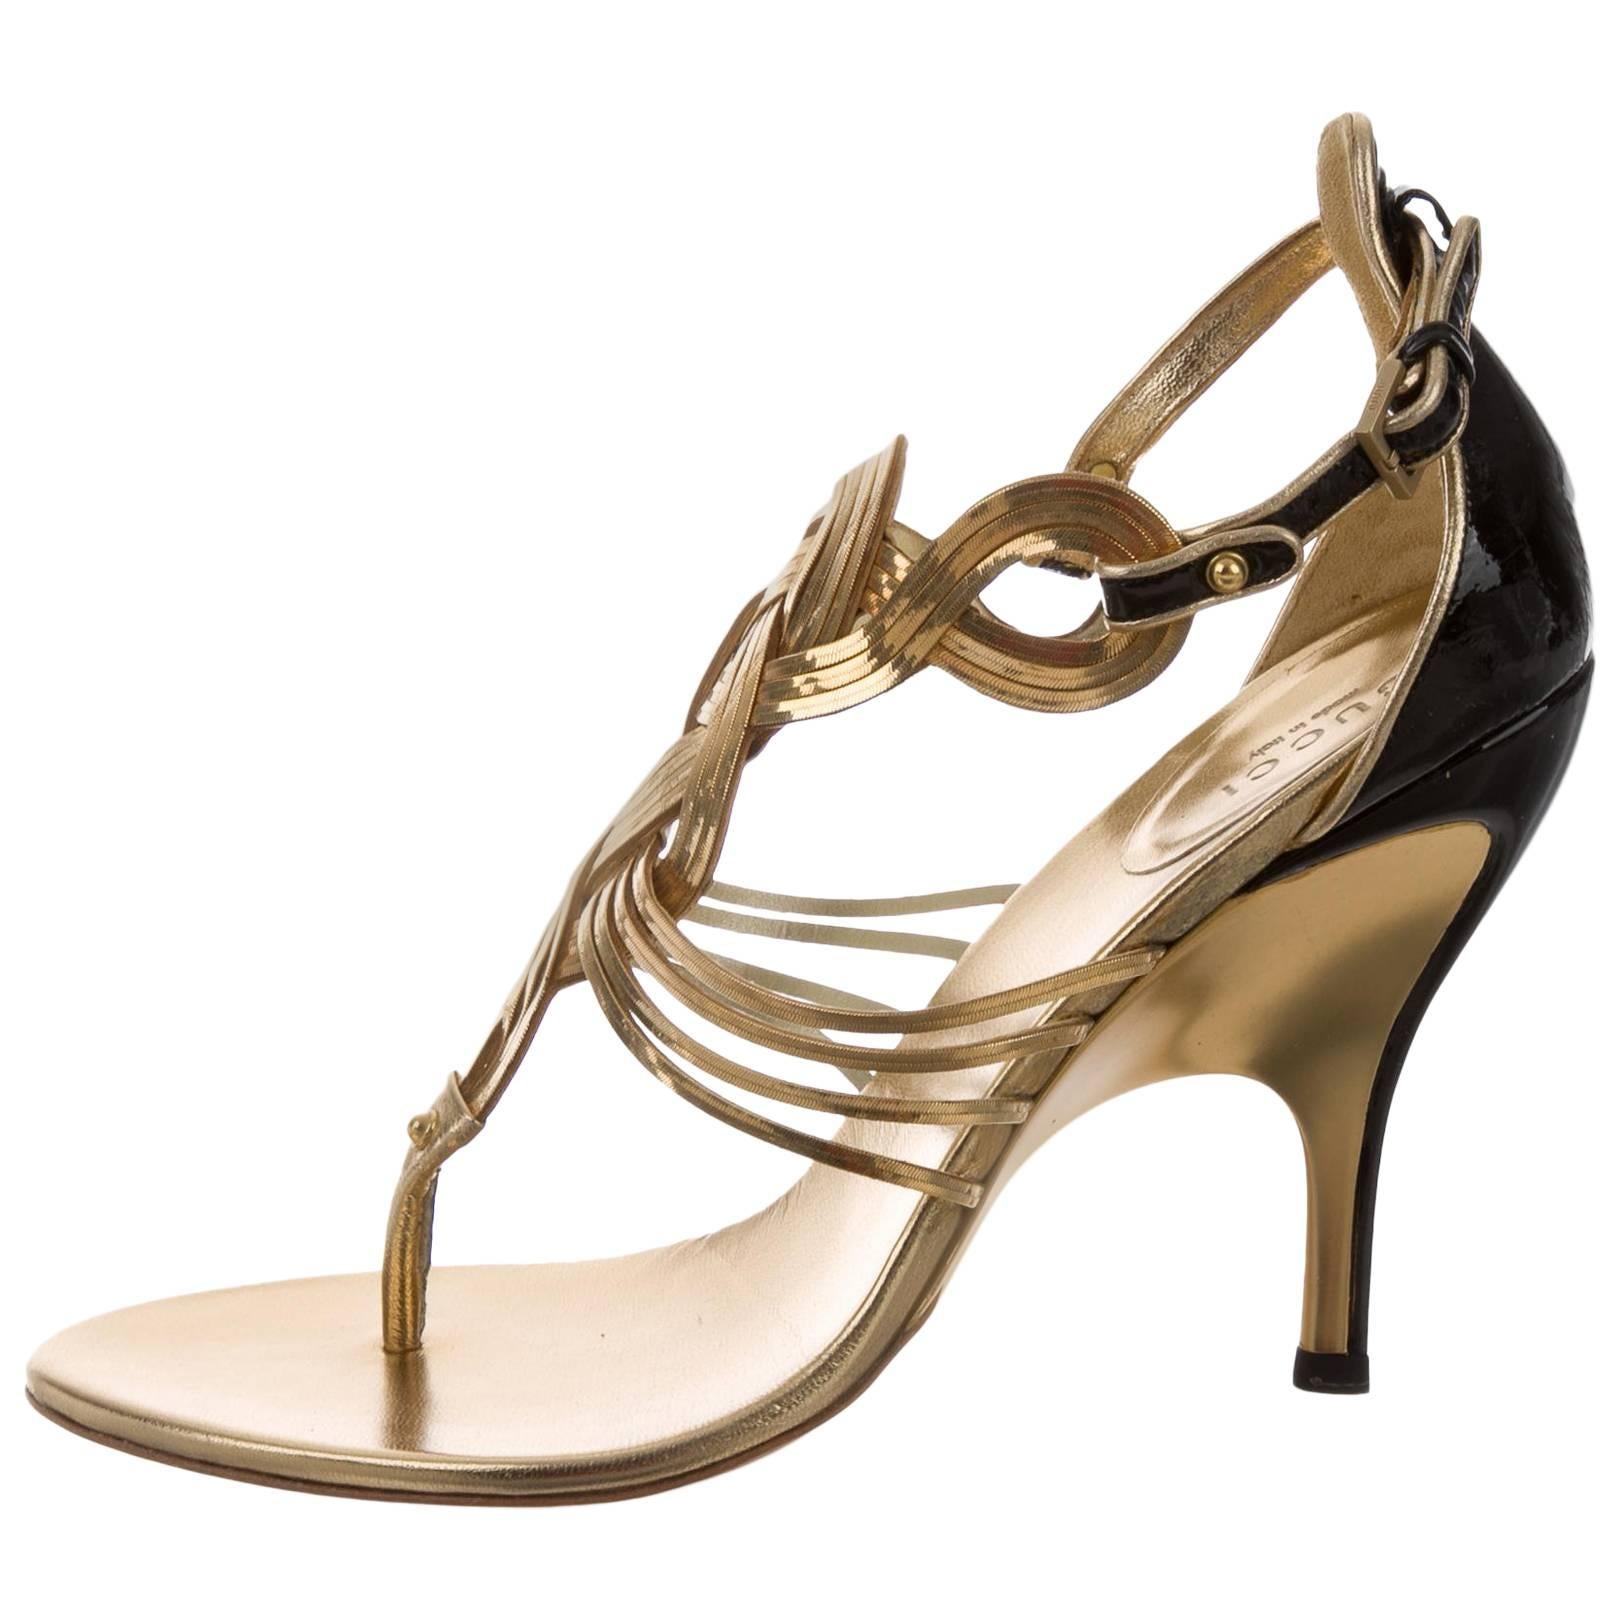 Gucci New Gold Chain Black Patent Leather Evening Heels Sandals in Box